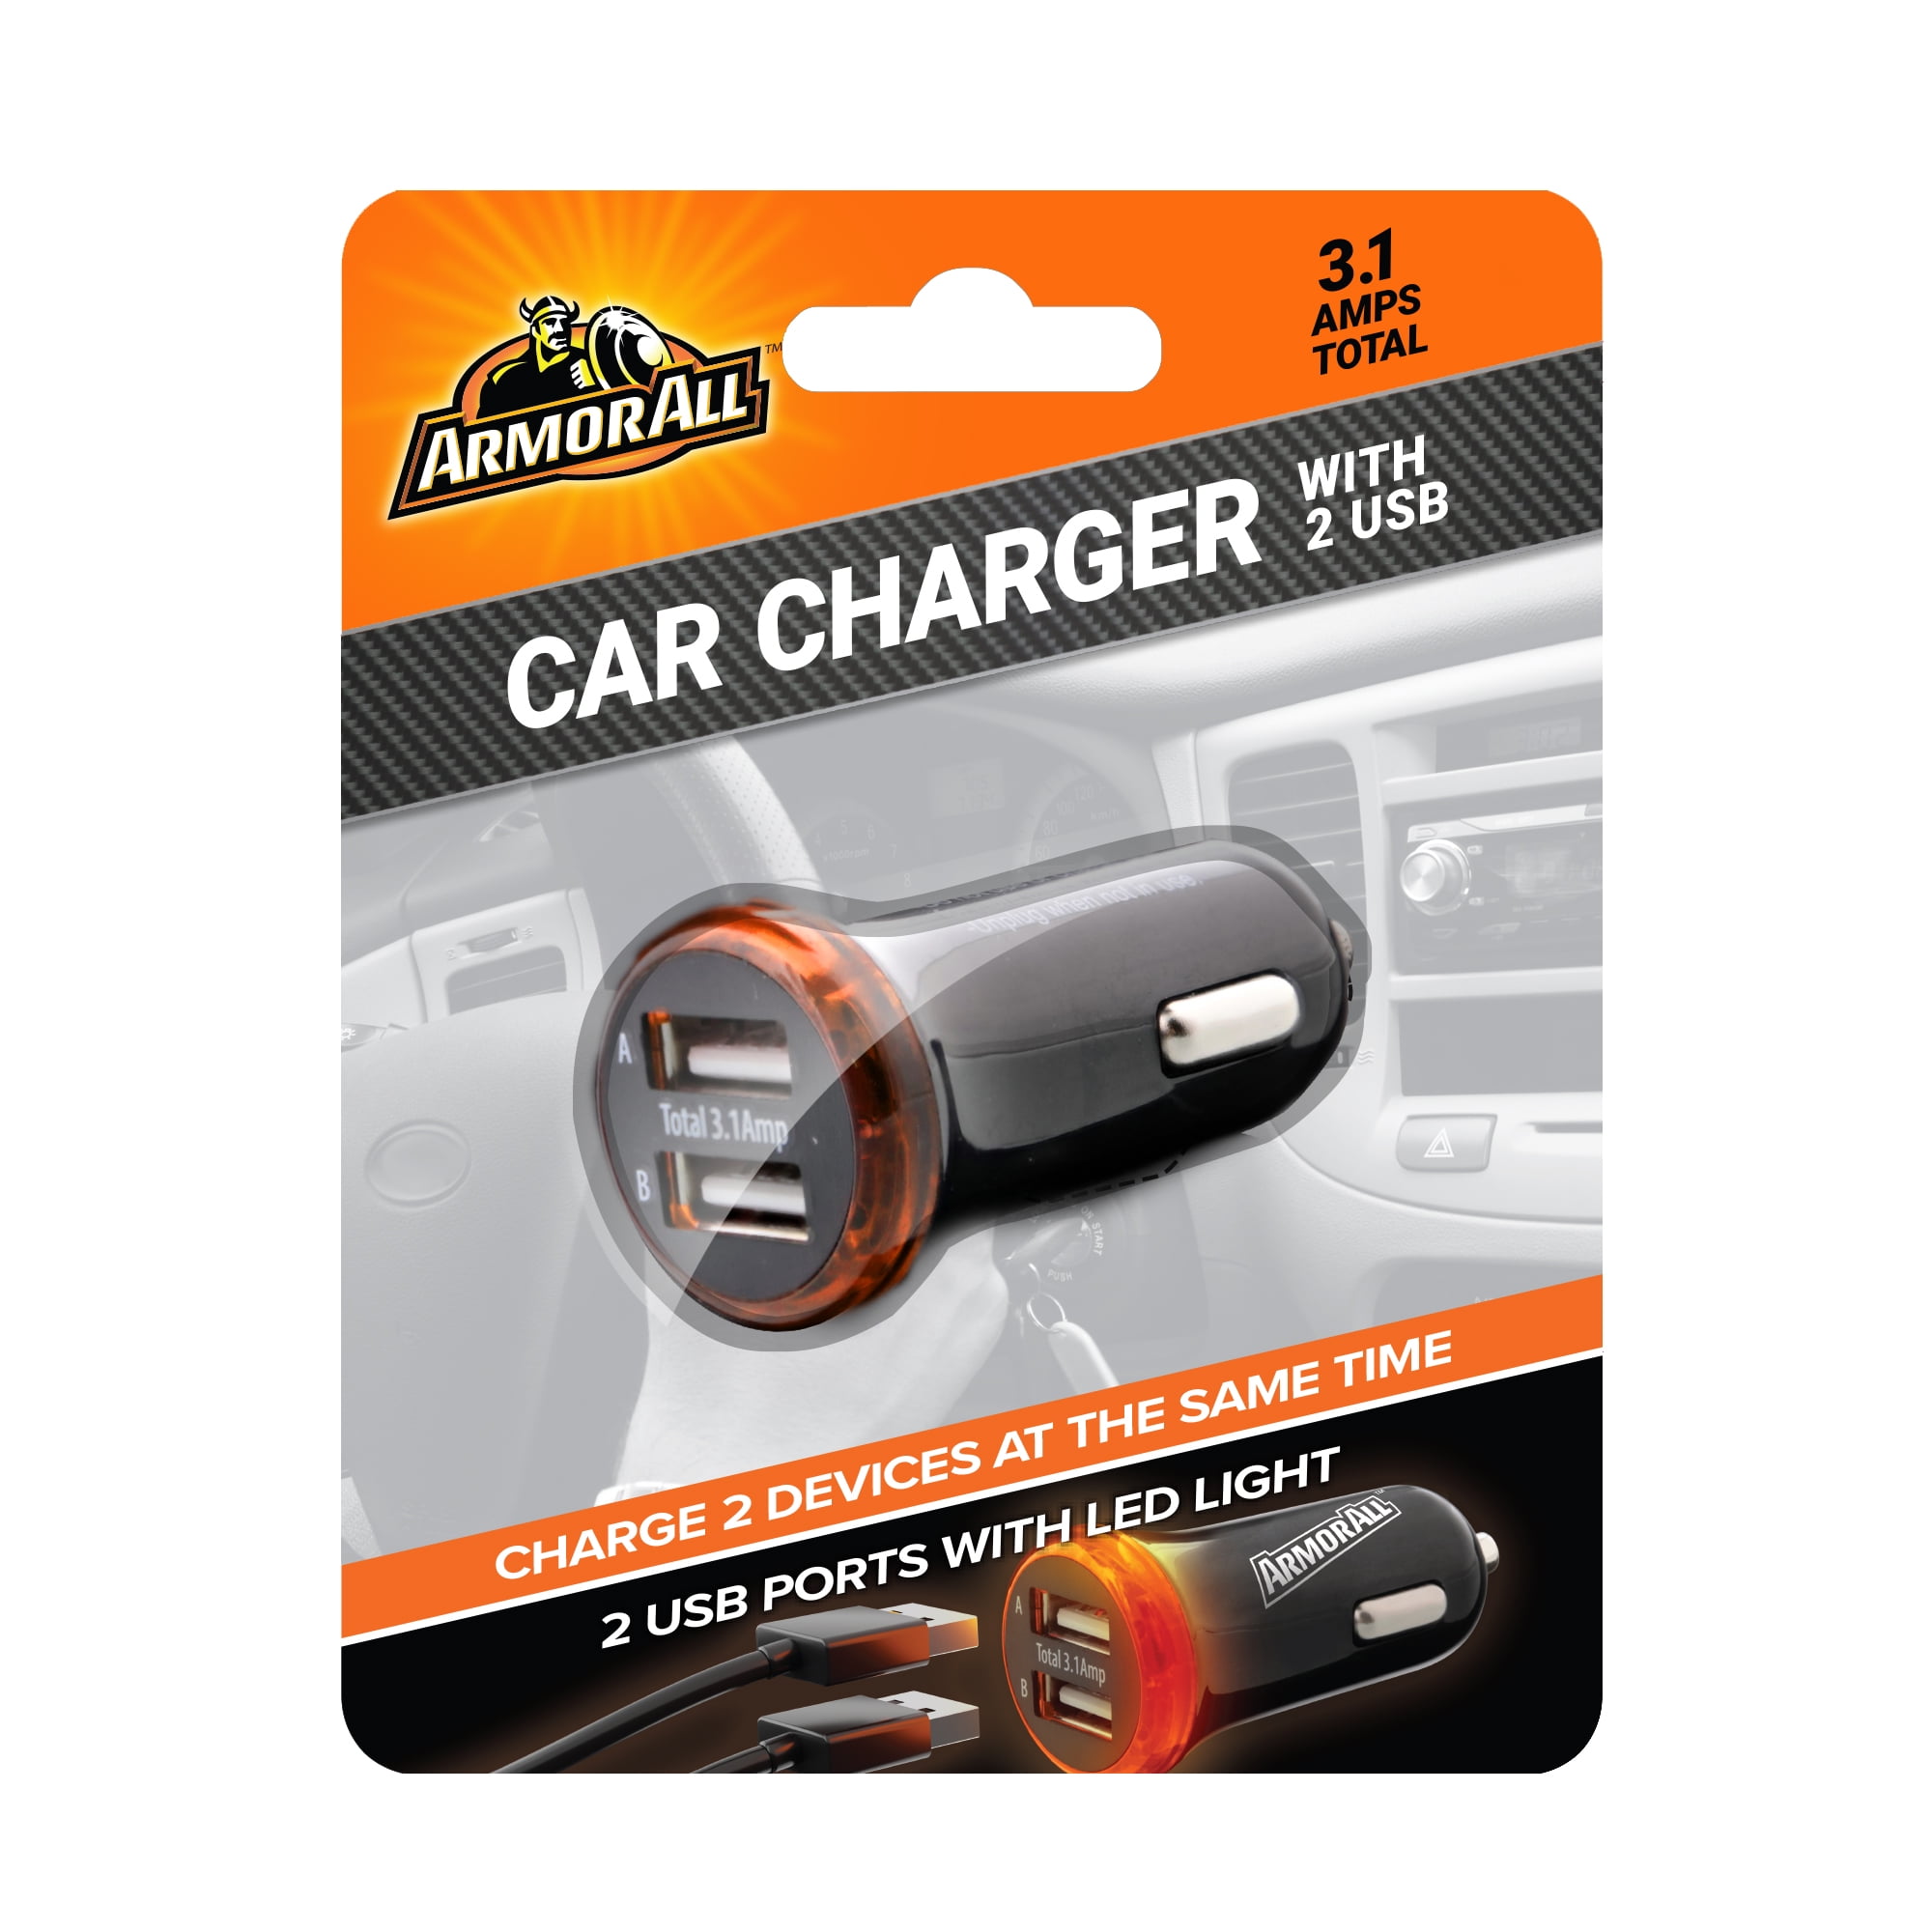 Armor All Universal 2-Port USB Car Charger, 3.1 Amp, Power Devices, Connect to DC Port, Size: One size, Black